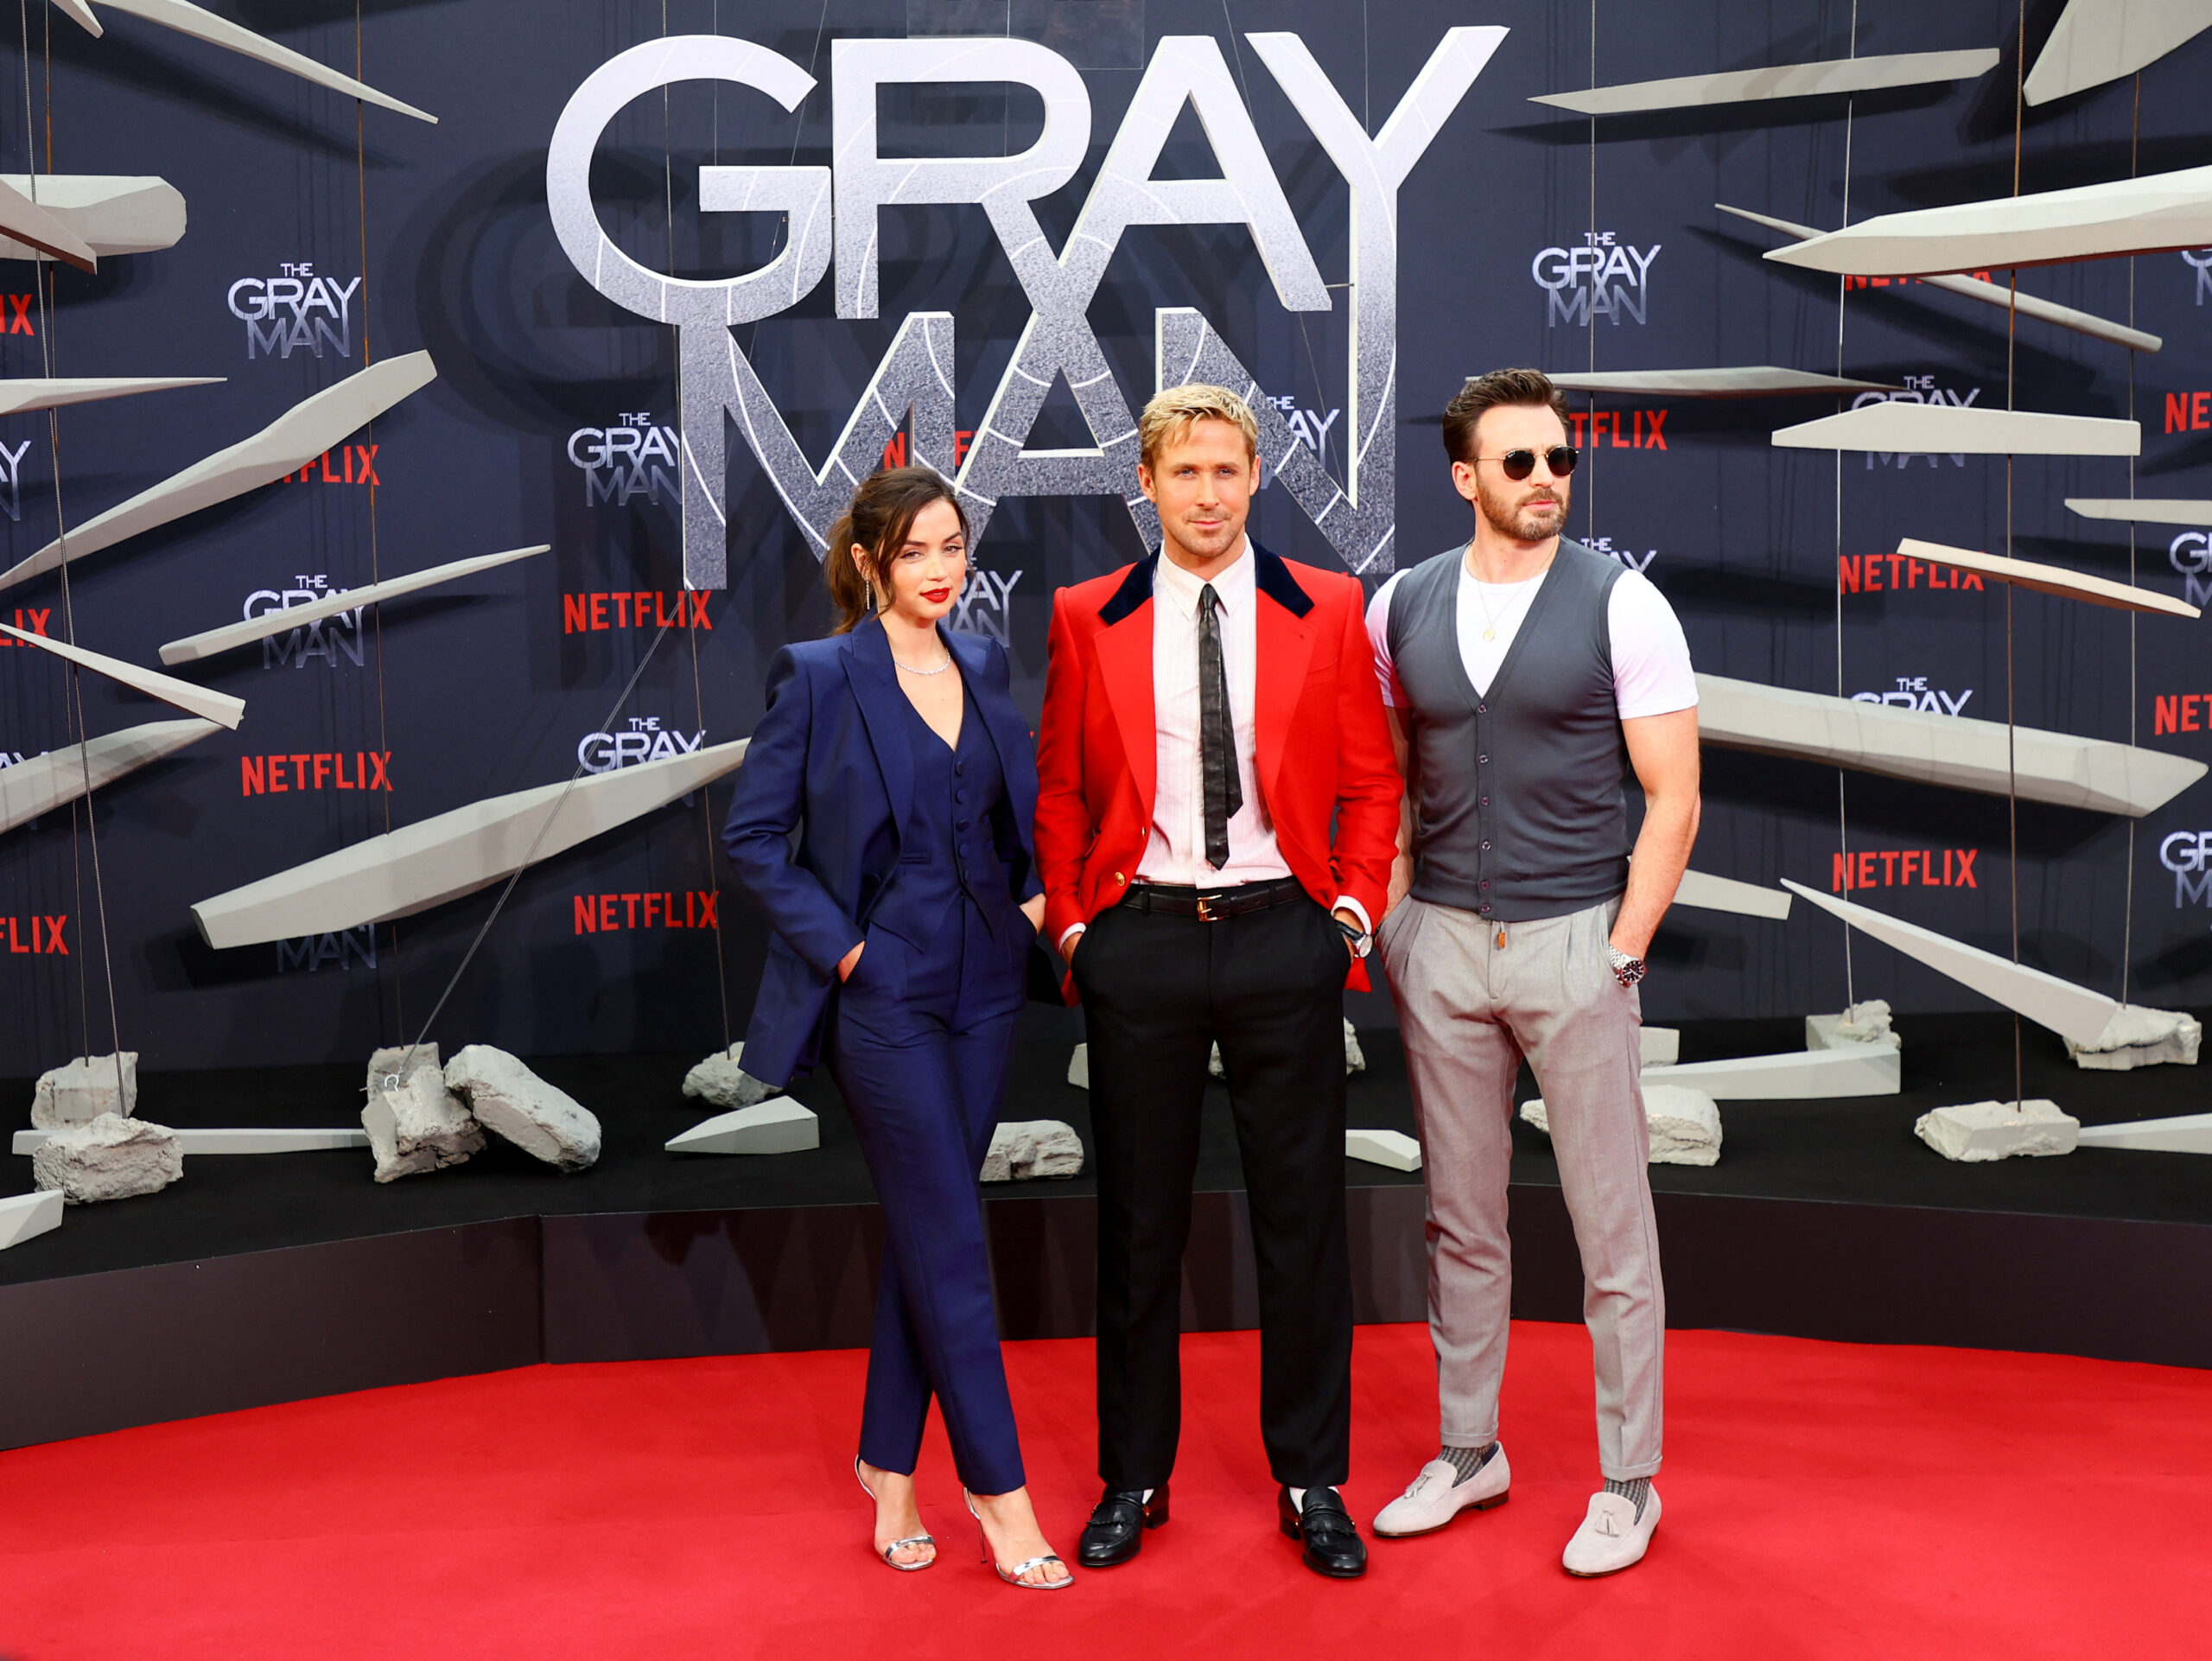 Netflix's 'The Gray Man' jumps to $200 million in opening weekend, with more than 88 million hours watched